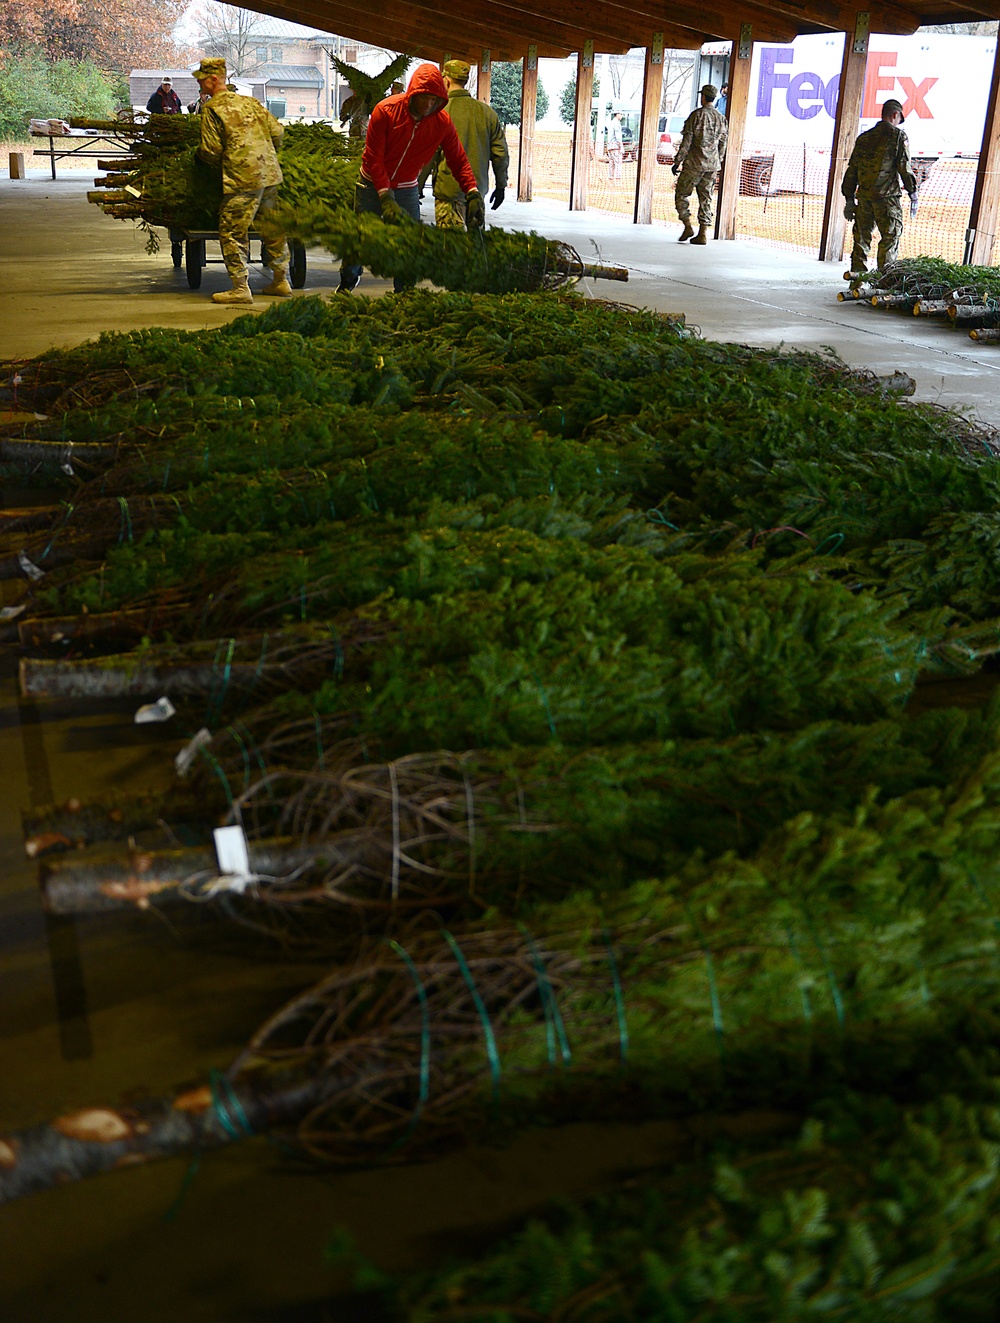 Trees for Troops: the SPIRIT of giving